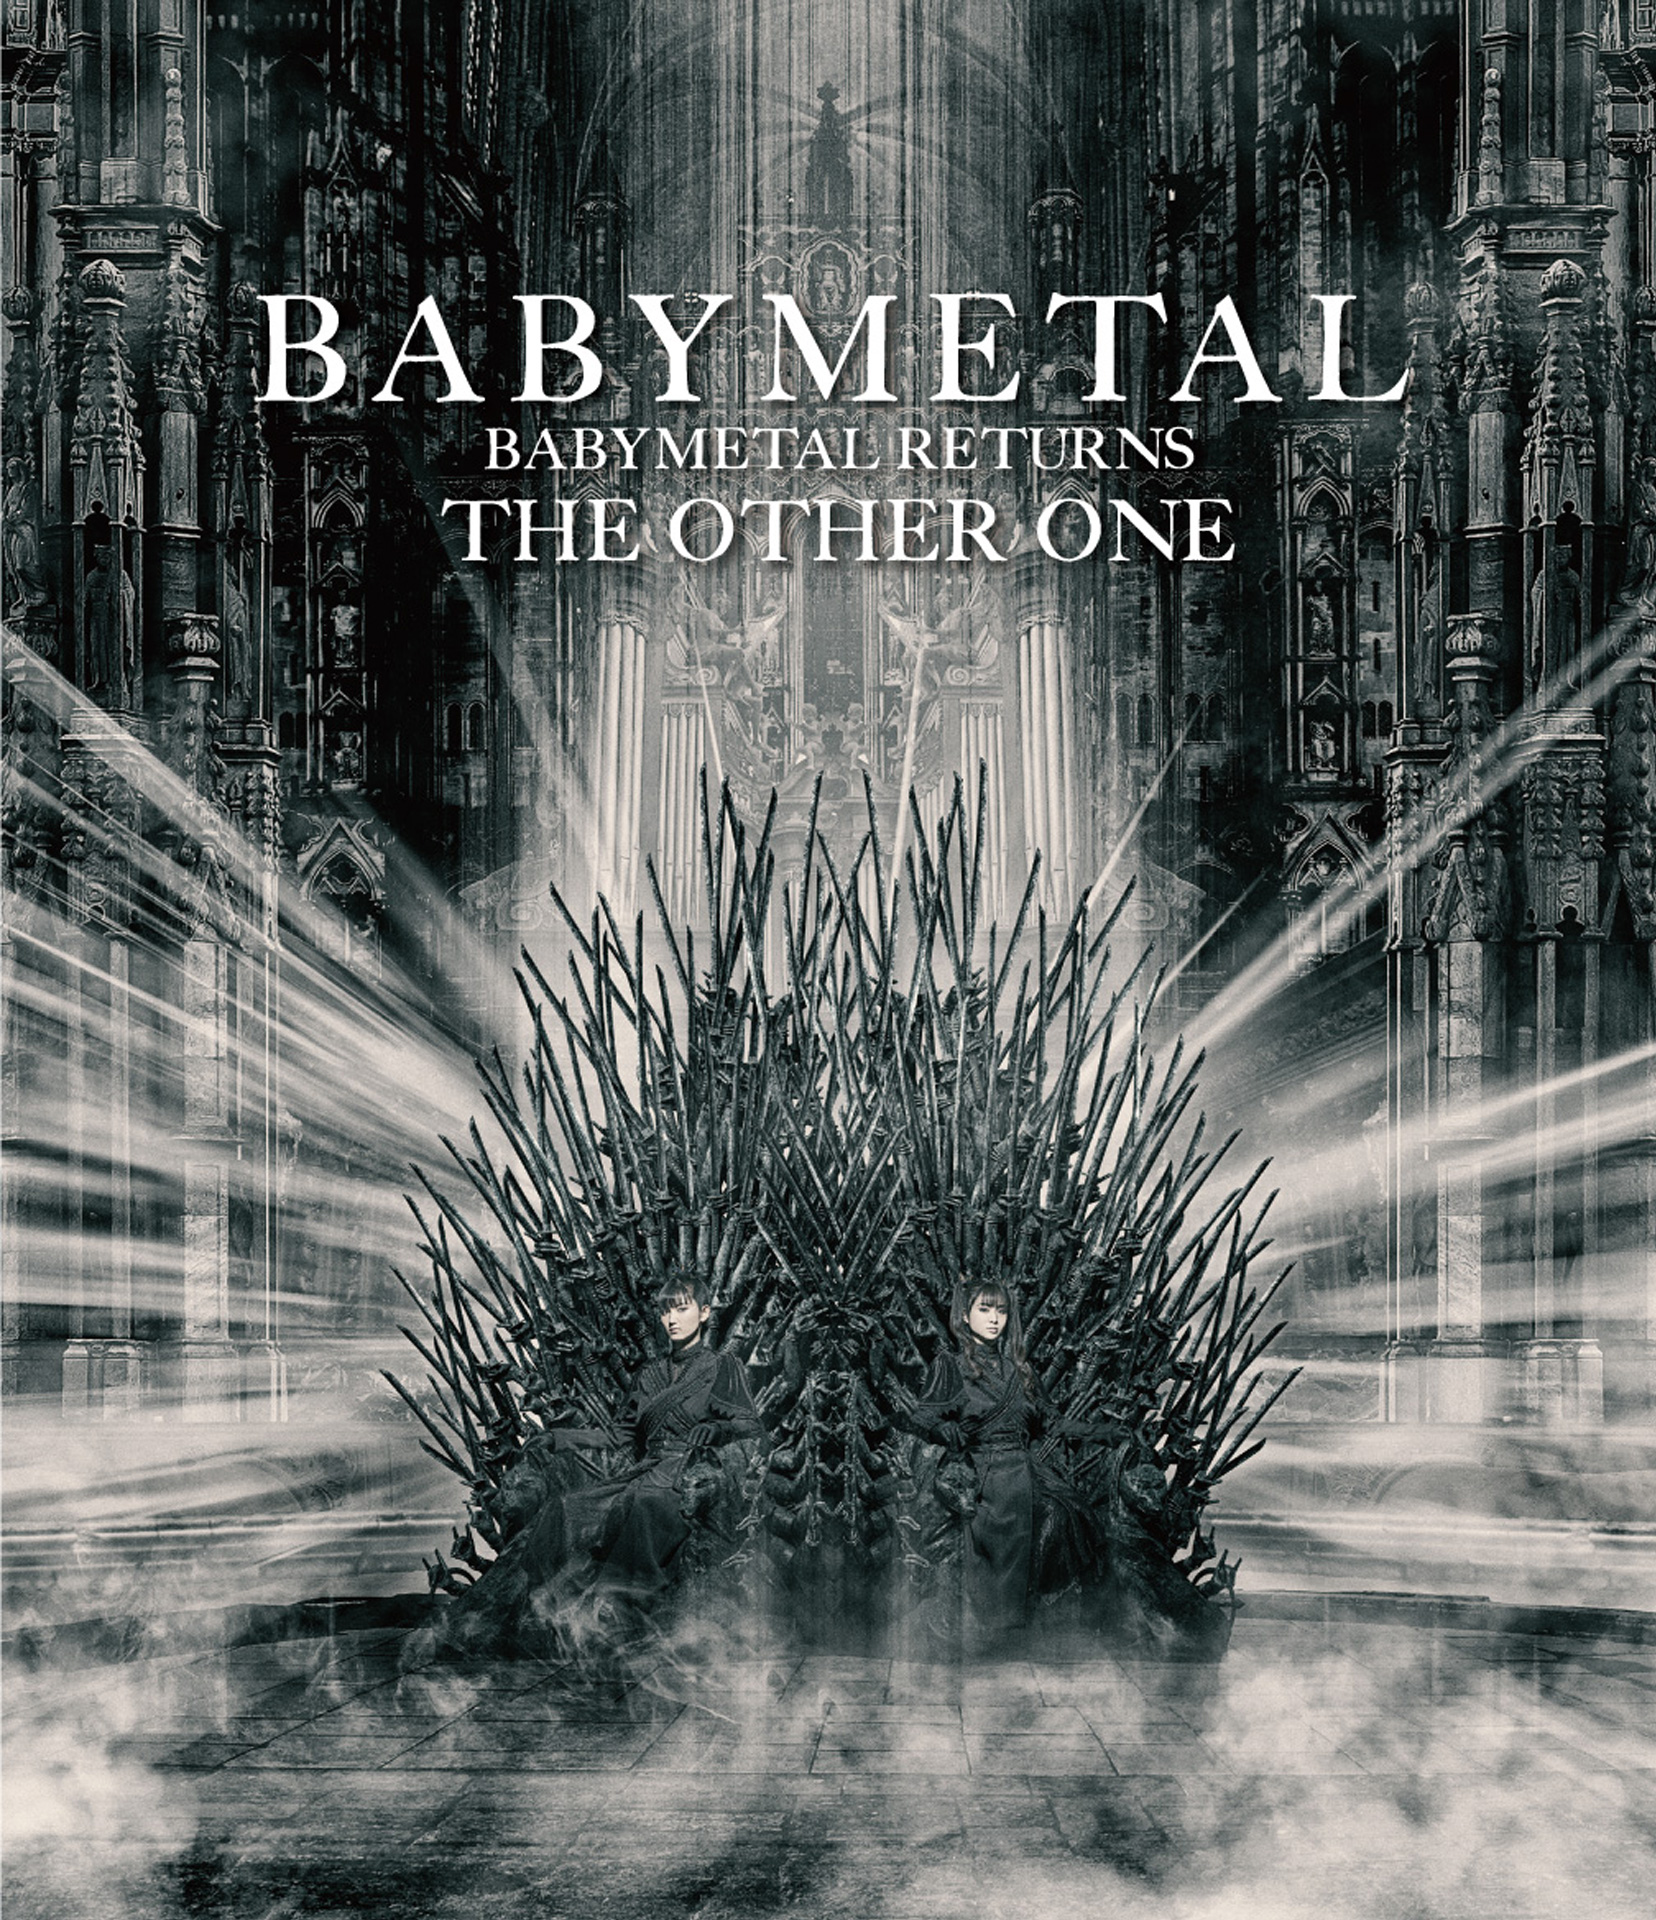 『BABYMETAL RETURNS - THE OTHER ONE -』Blu-ray（通常盤）ジャケット